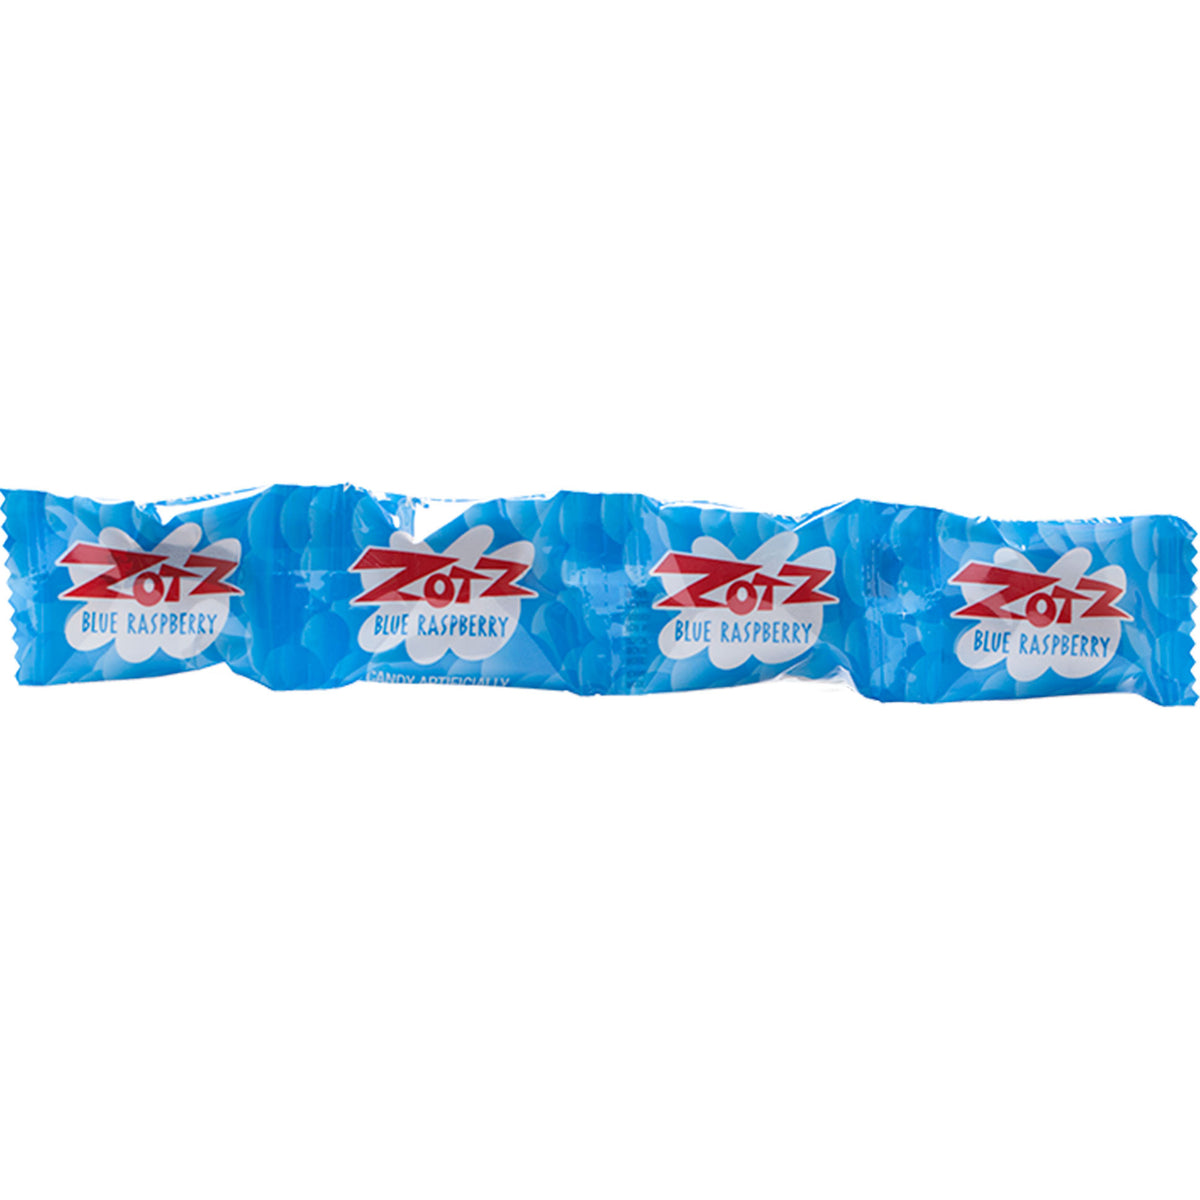 Zots Candy R  The Yum Factory, Inc.